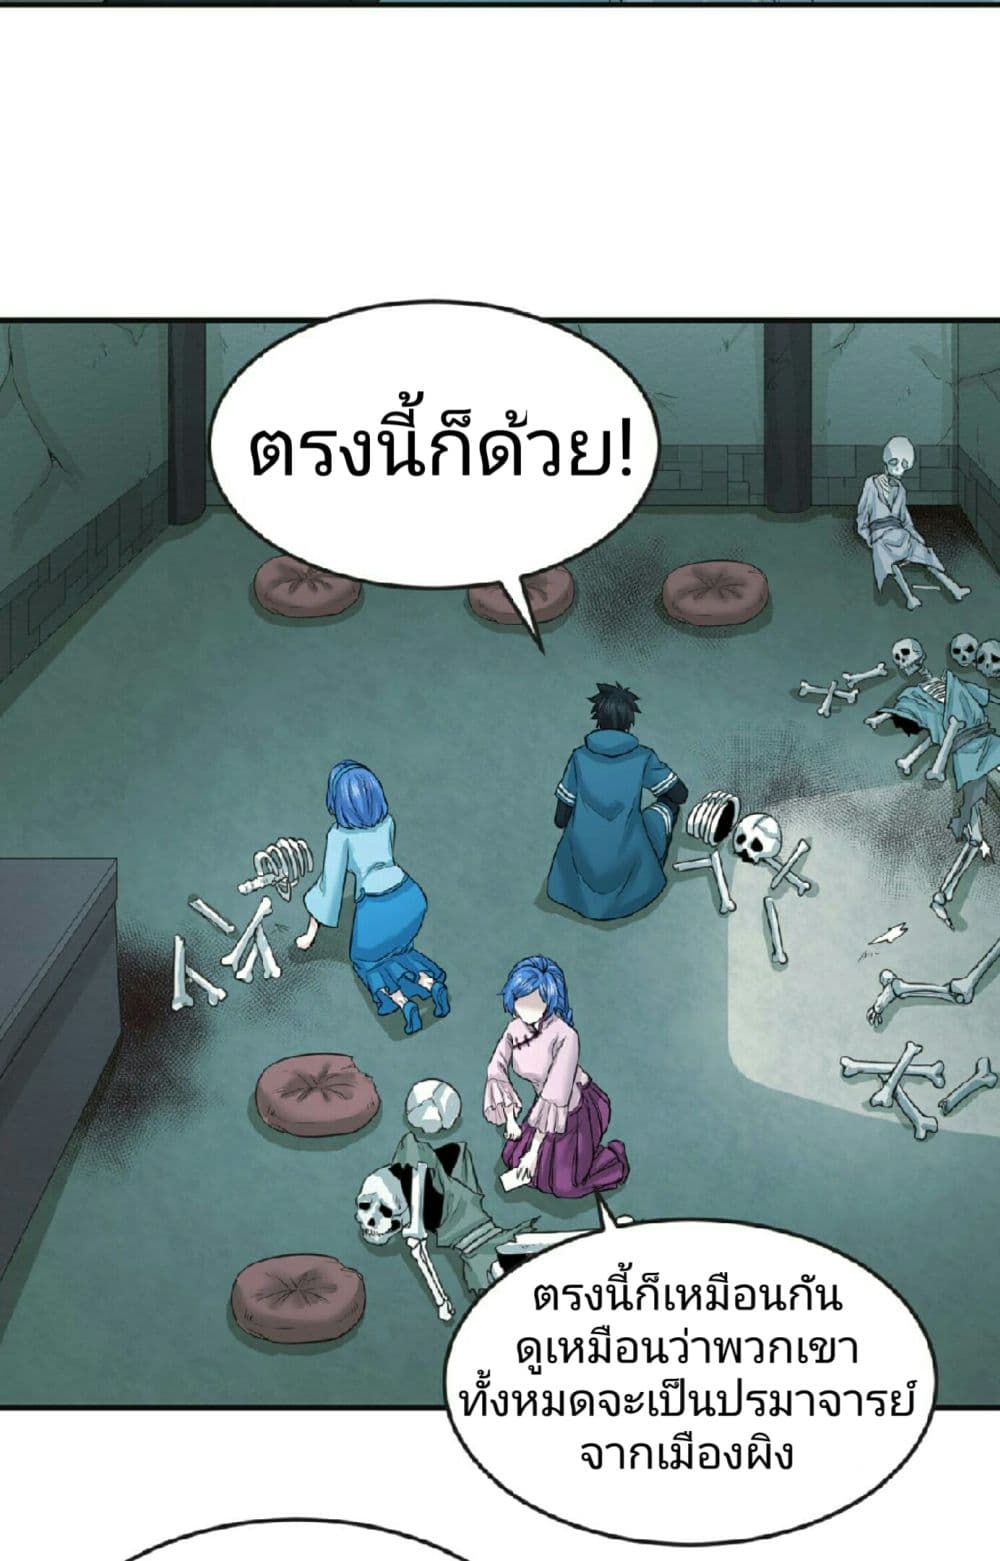 The Age of Ghost Spirits à¸à¸­à¸à¸à¸µà¹ 50 (4)